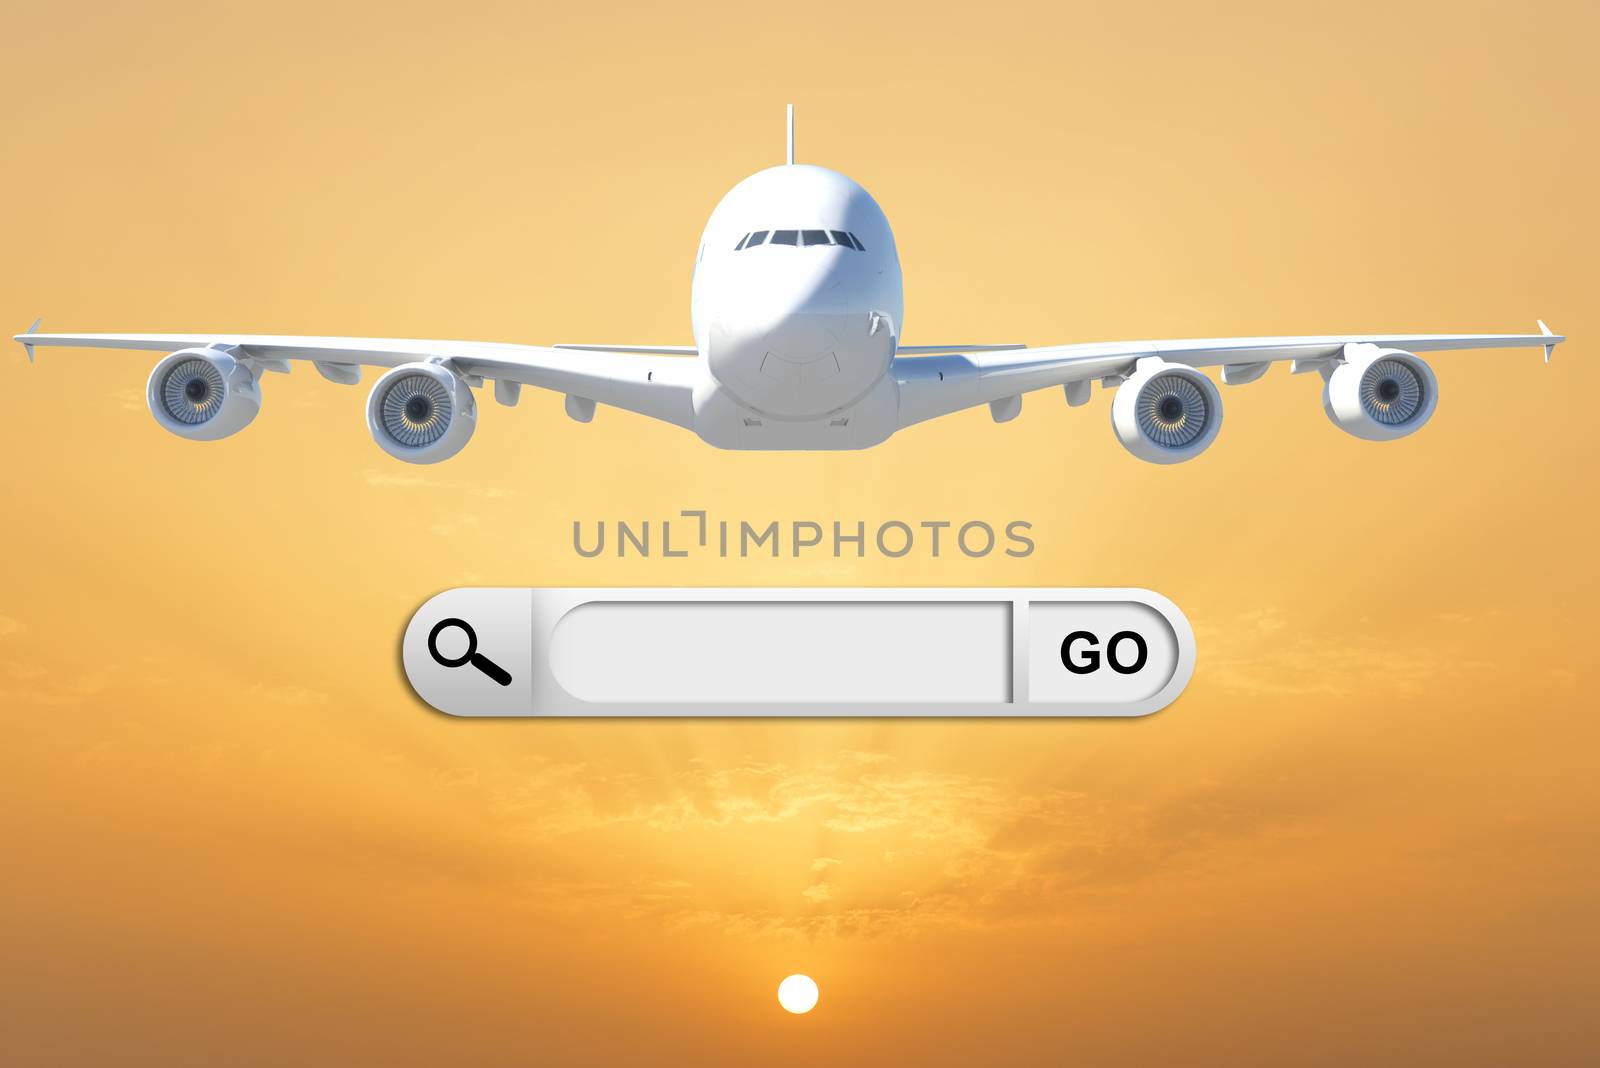 Search bar in browser. Airplane on background of beautiful sunset